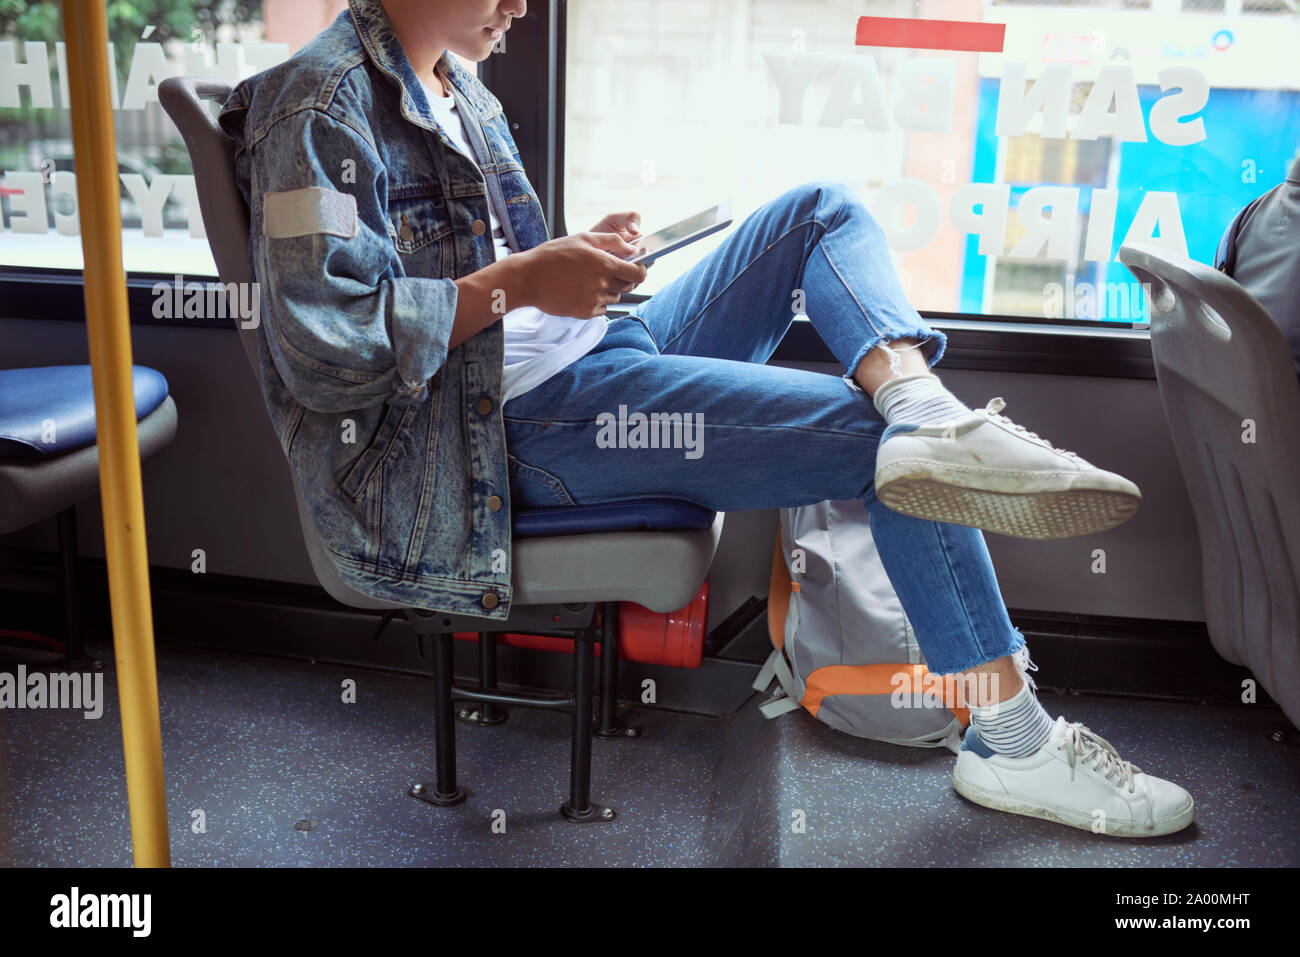 Transport. People in the bus. He reading book in transport. Stock Photo